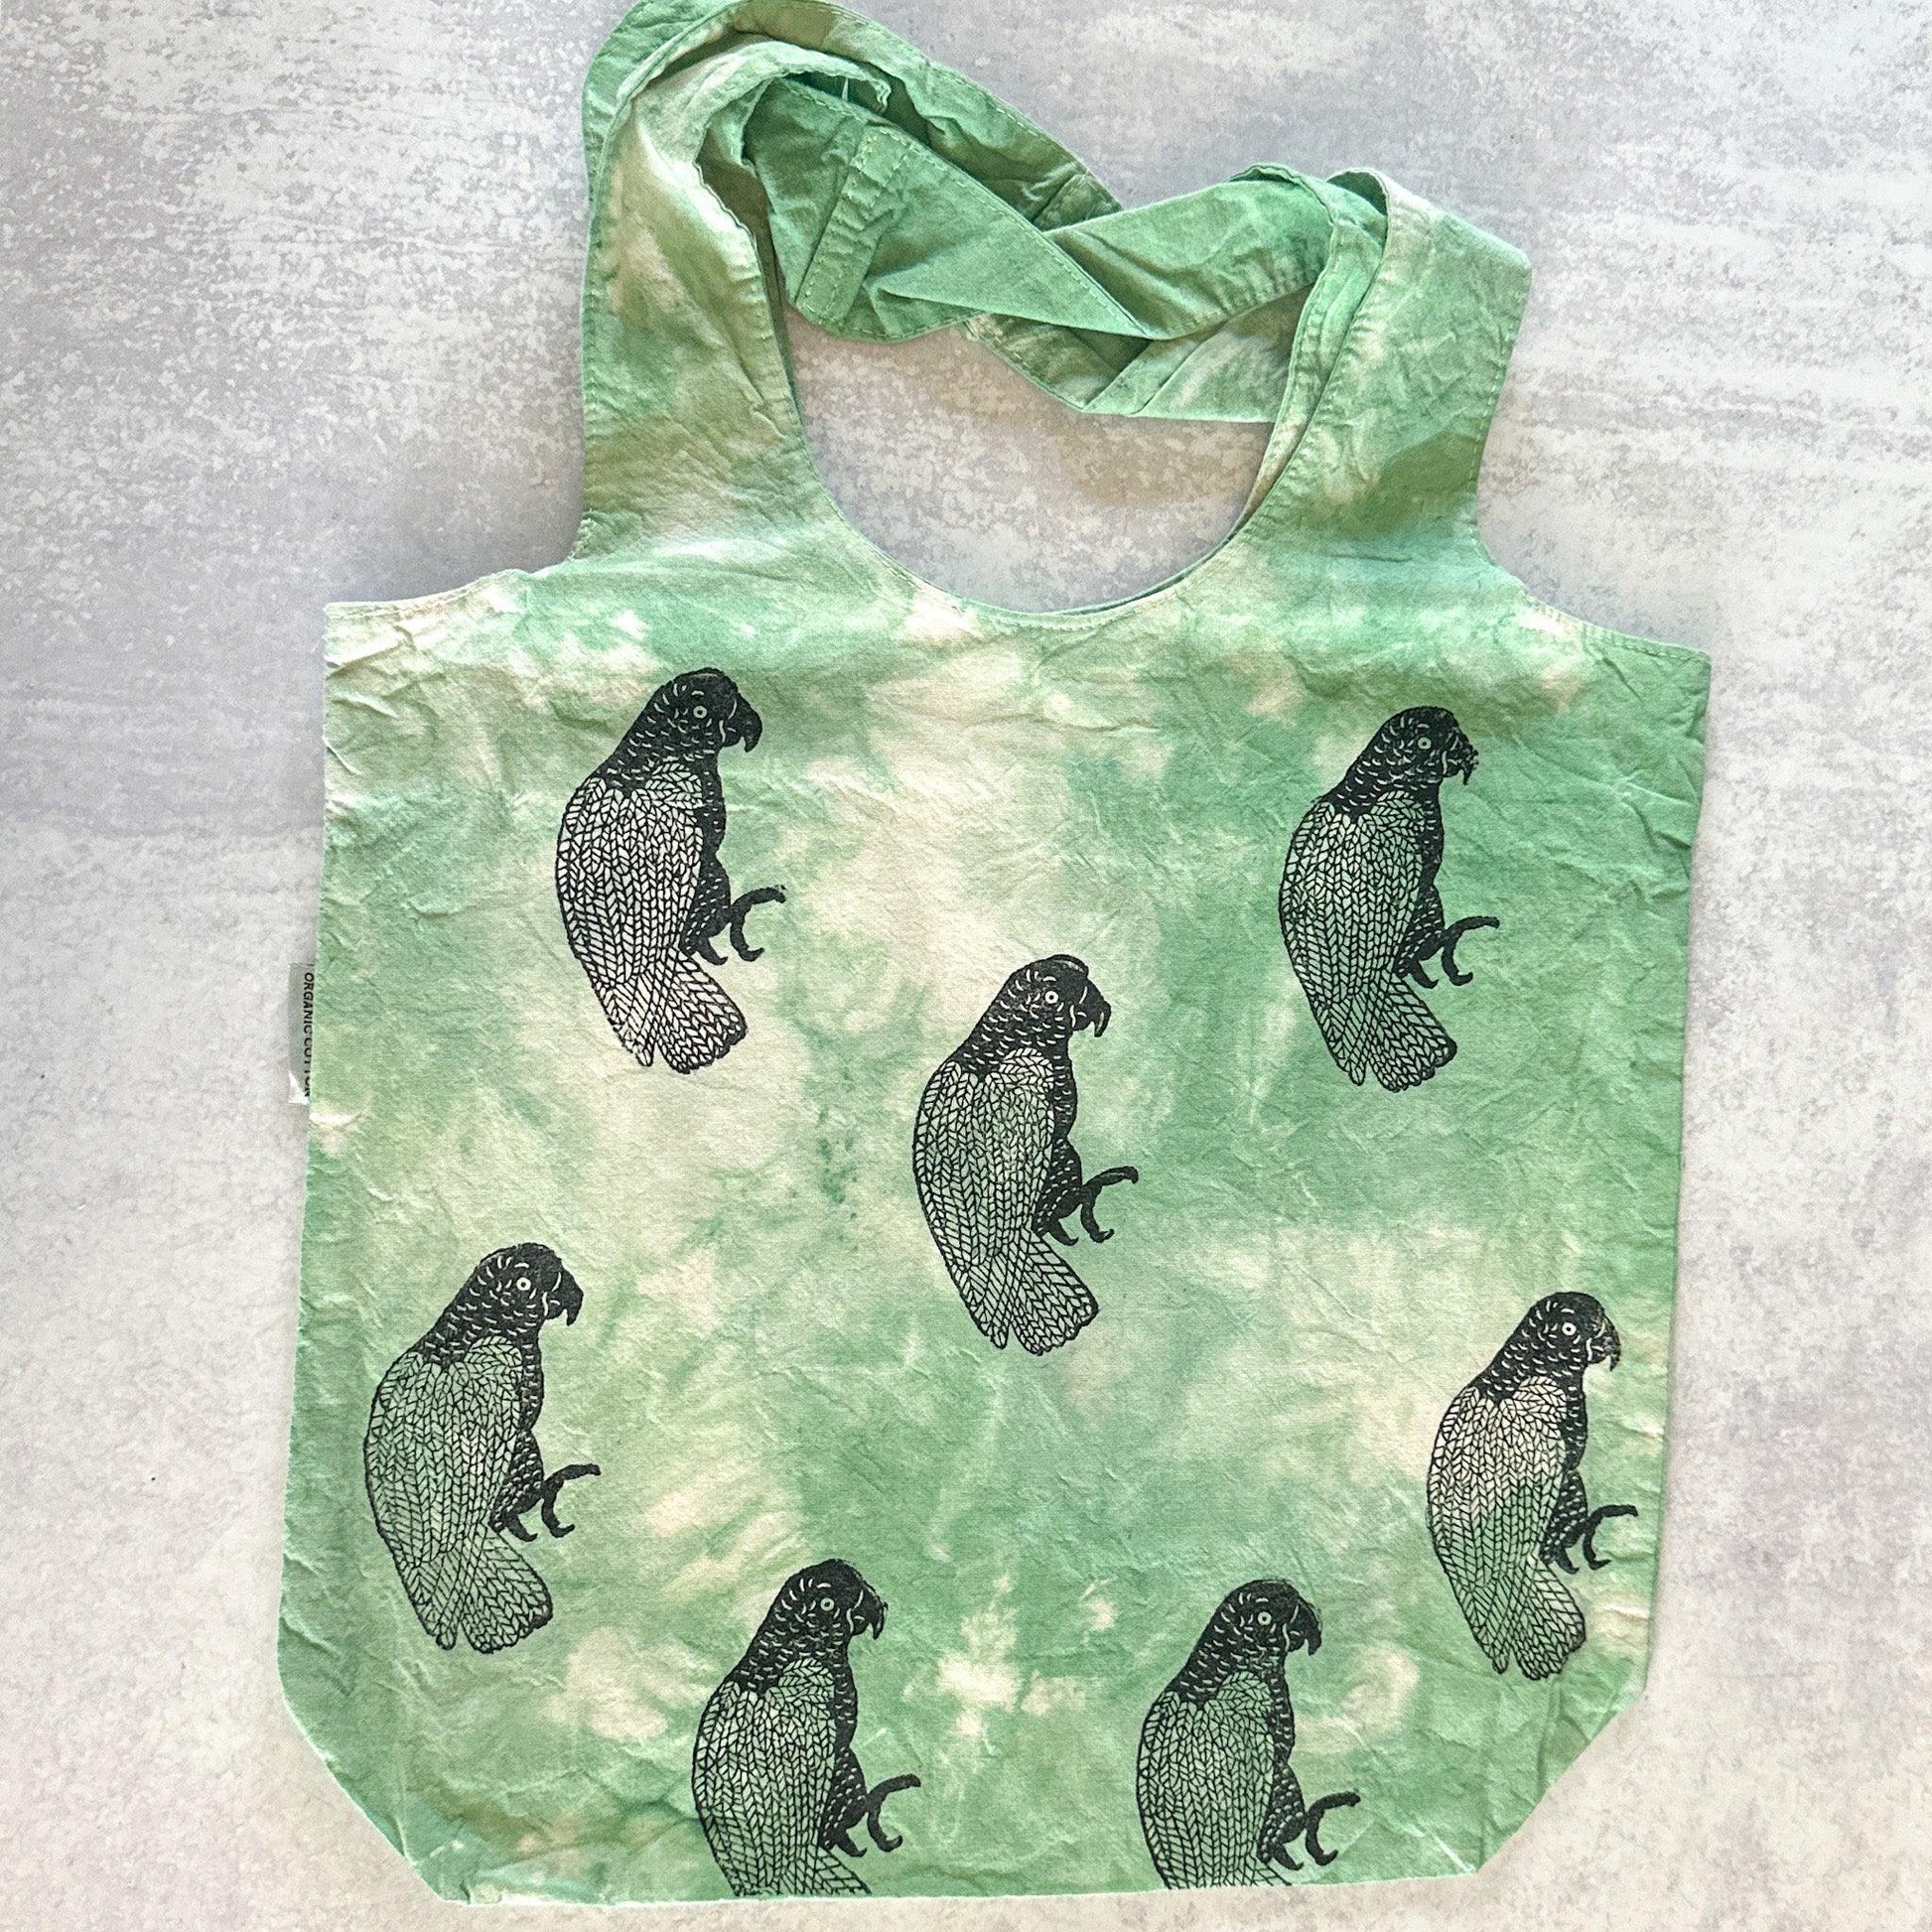 Green Tie-dye Parrot Tote Bag - The Serpentry